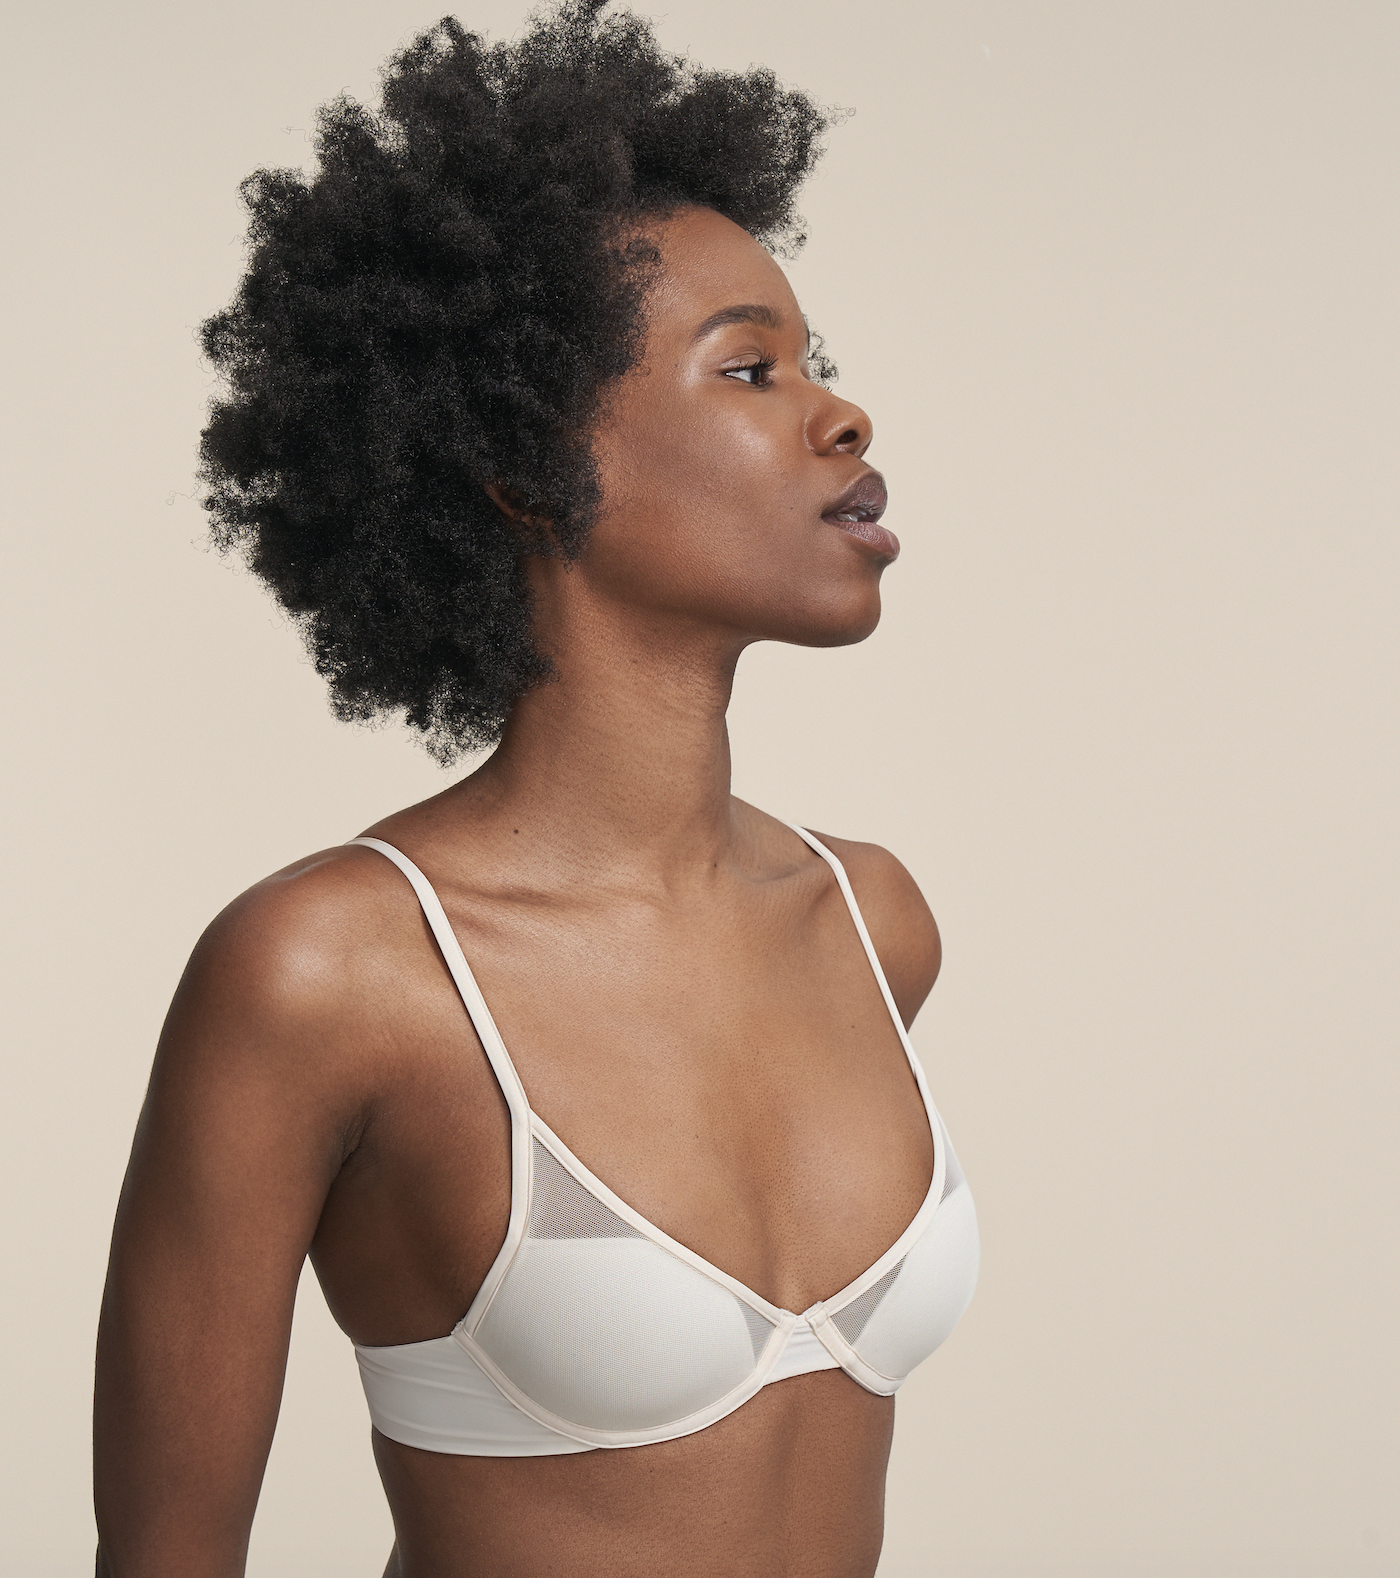 Pepper Bra Review and My Experience Growing Up Small Chested